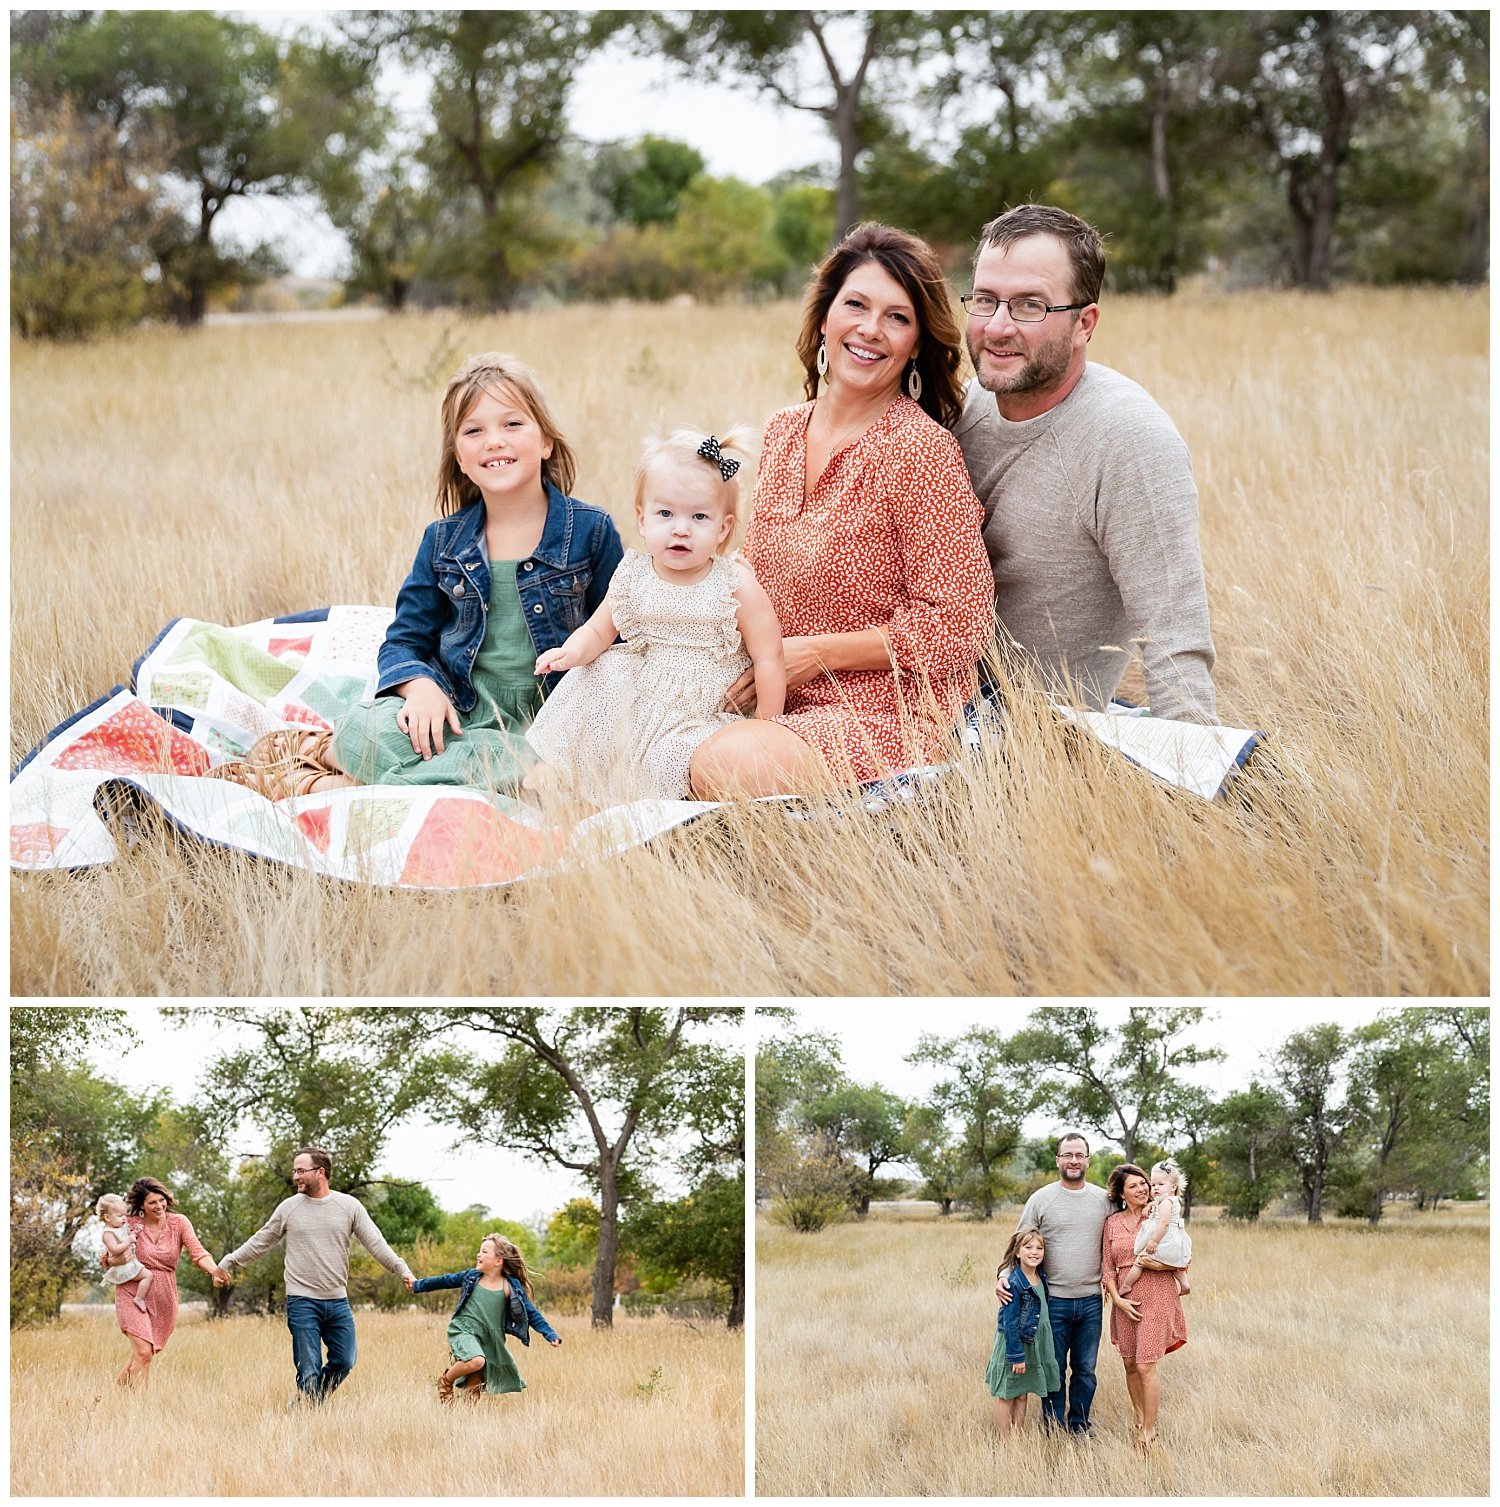 Family styled by Style and Select for their family session in Williston, North Dakota.